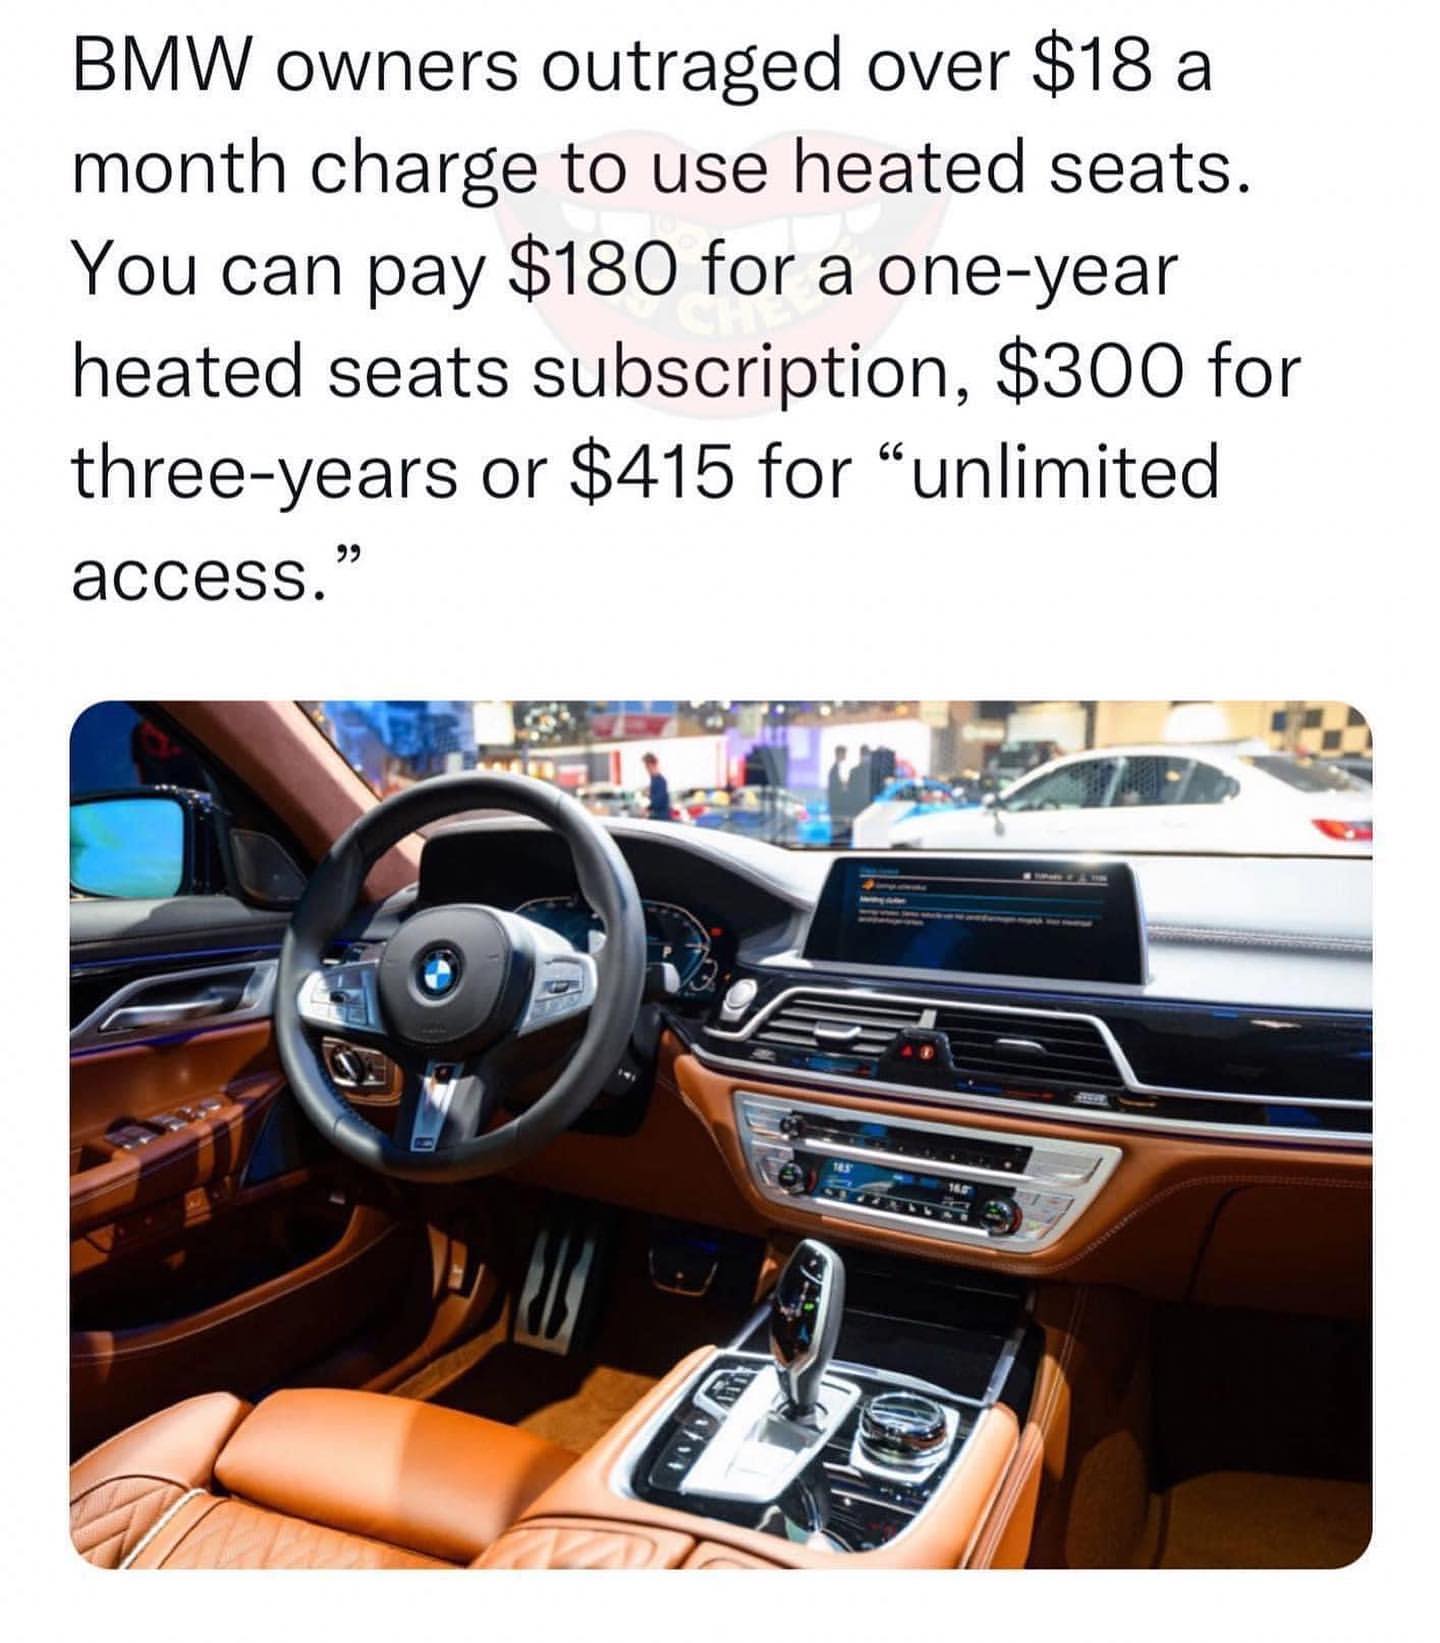 BMW owners outraged over $18 a month charge to use heated seats. You can pay $180 for a one-year heated seats subscription, $300 for three-years or $415 for "unlimited access."